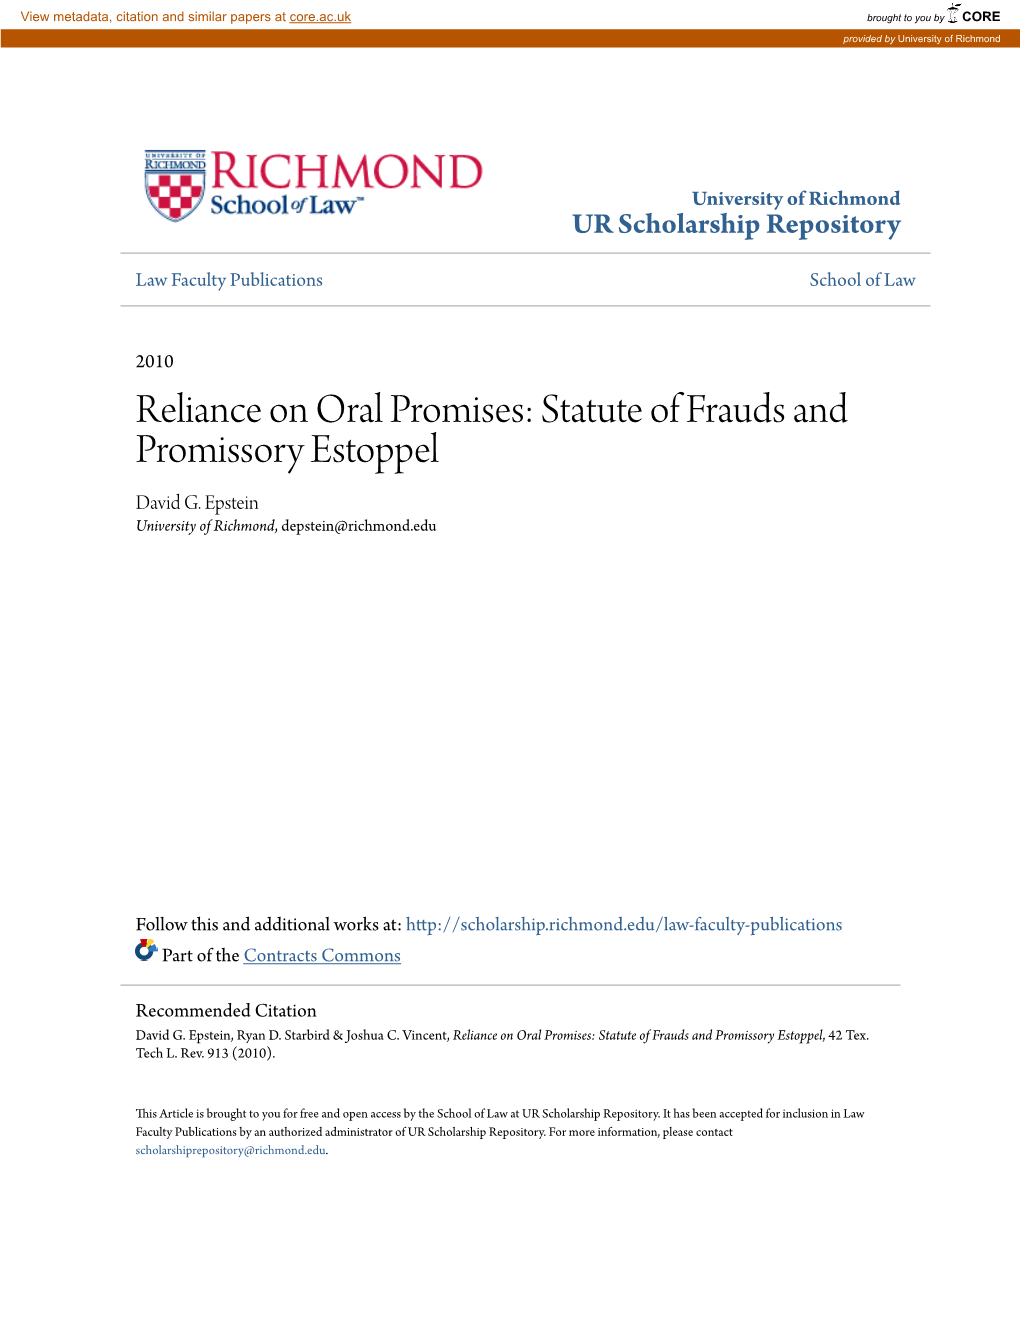 Reliance on Oral Promises: Statute of Frauds and Promissory Estoppel David G